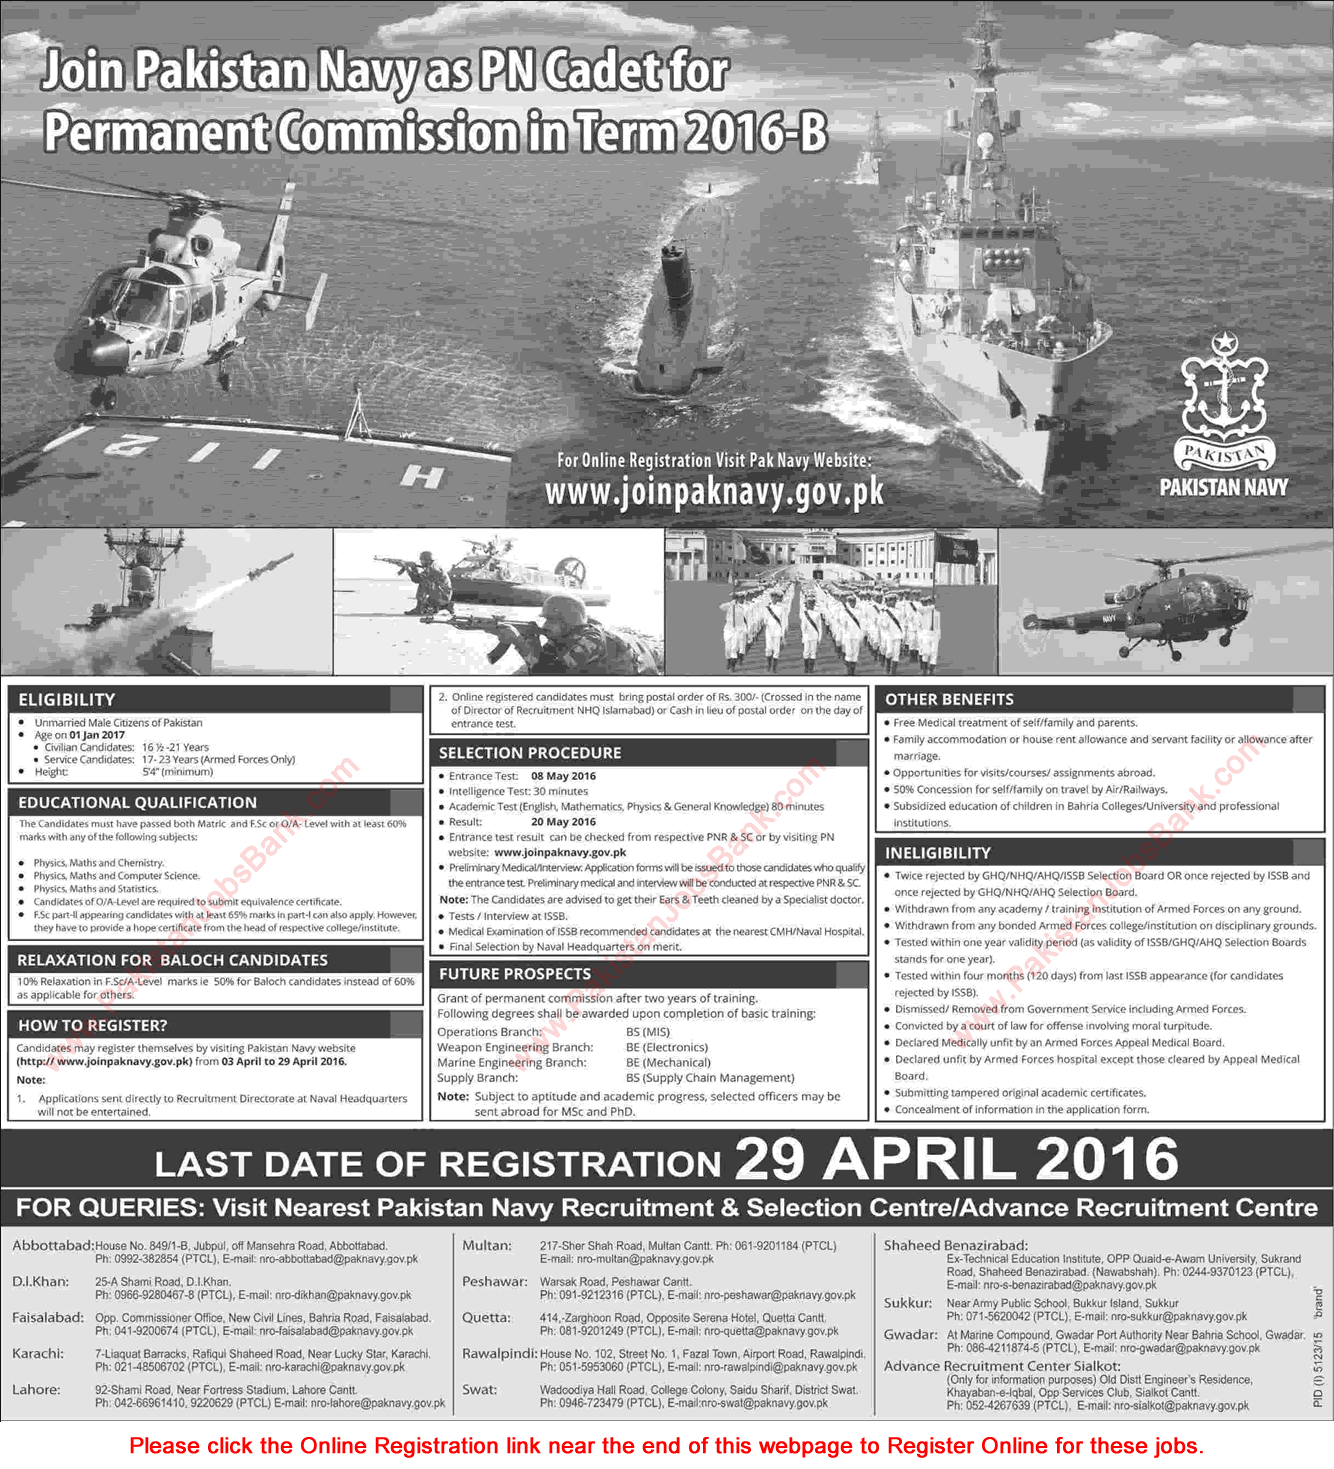 Join Pakistan Navy as PN Cadet 2016 April Online Registration for Permanent Commission in Term 2016-B Latest